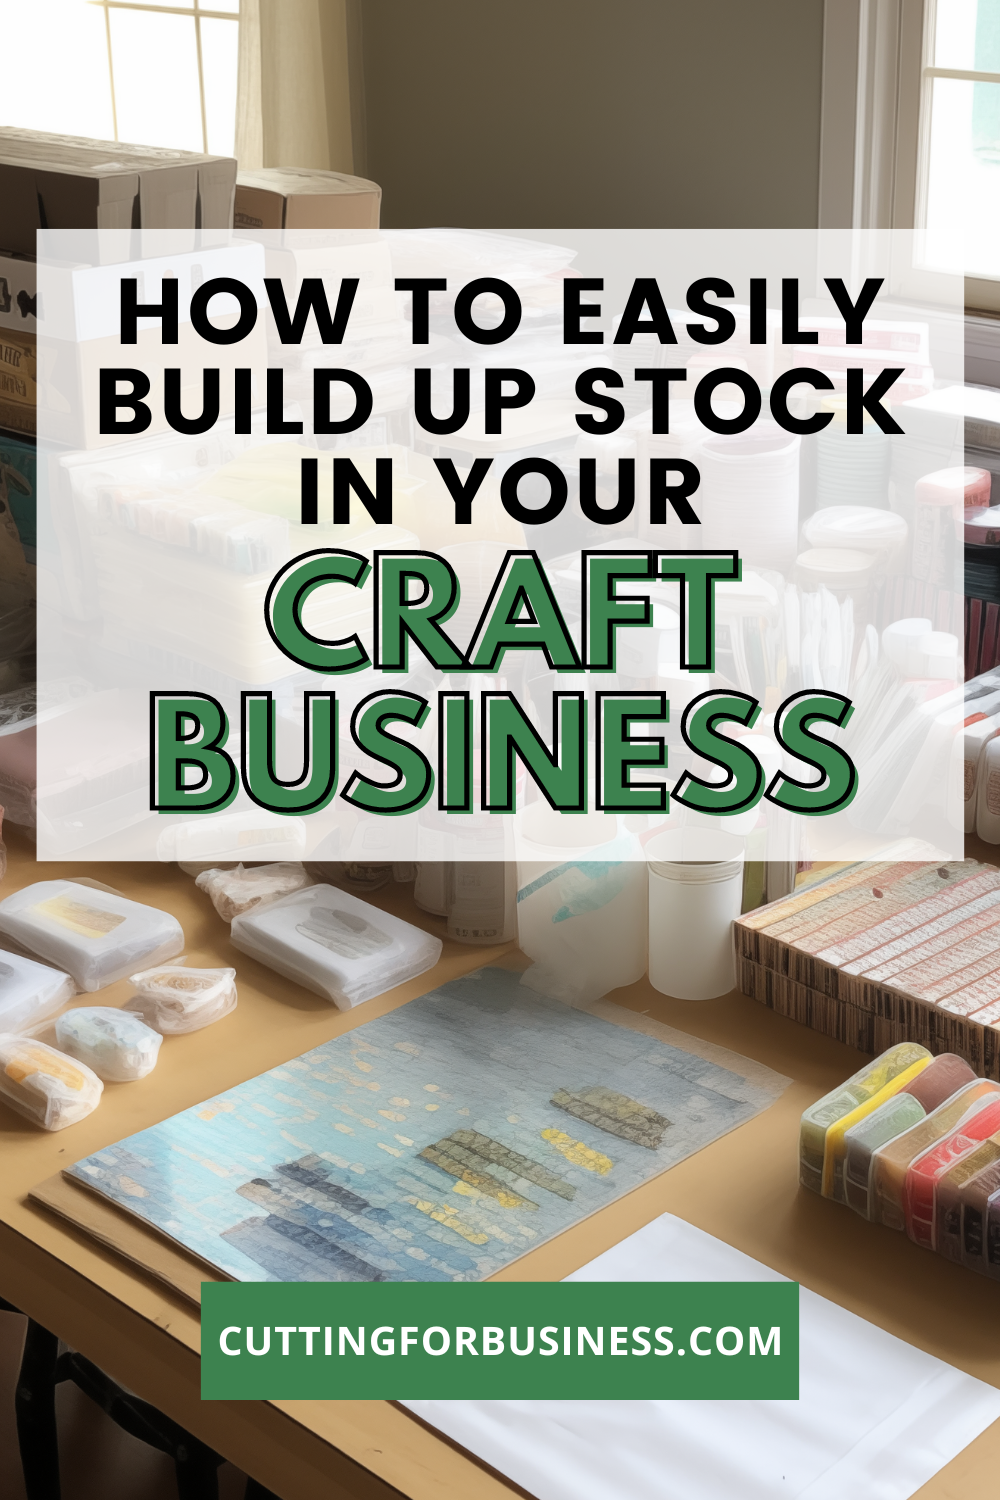 How To Easily Build Up Stock in Your Craft Business - cuttingforbusiness.com